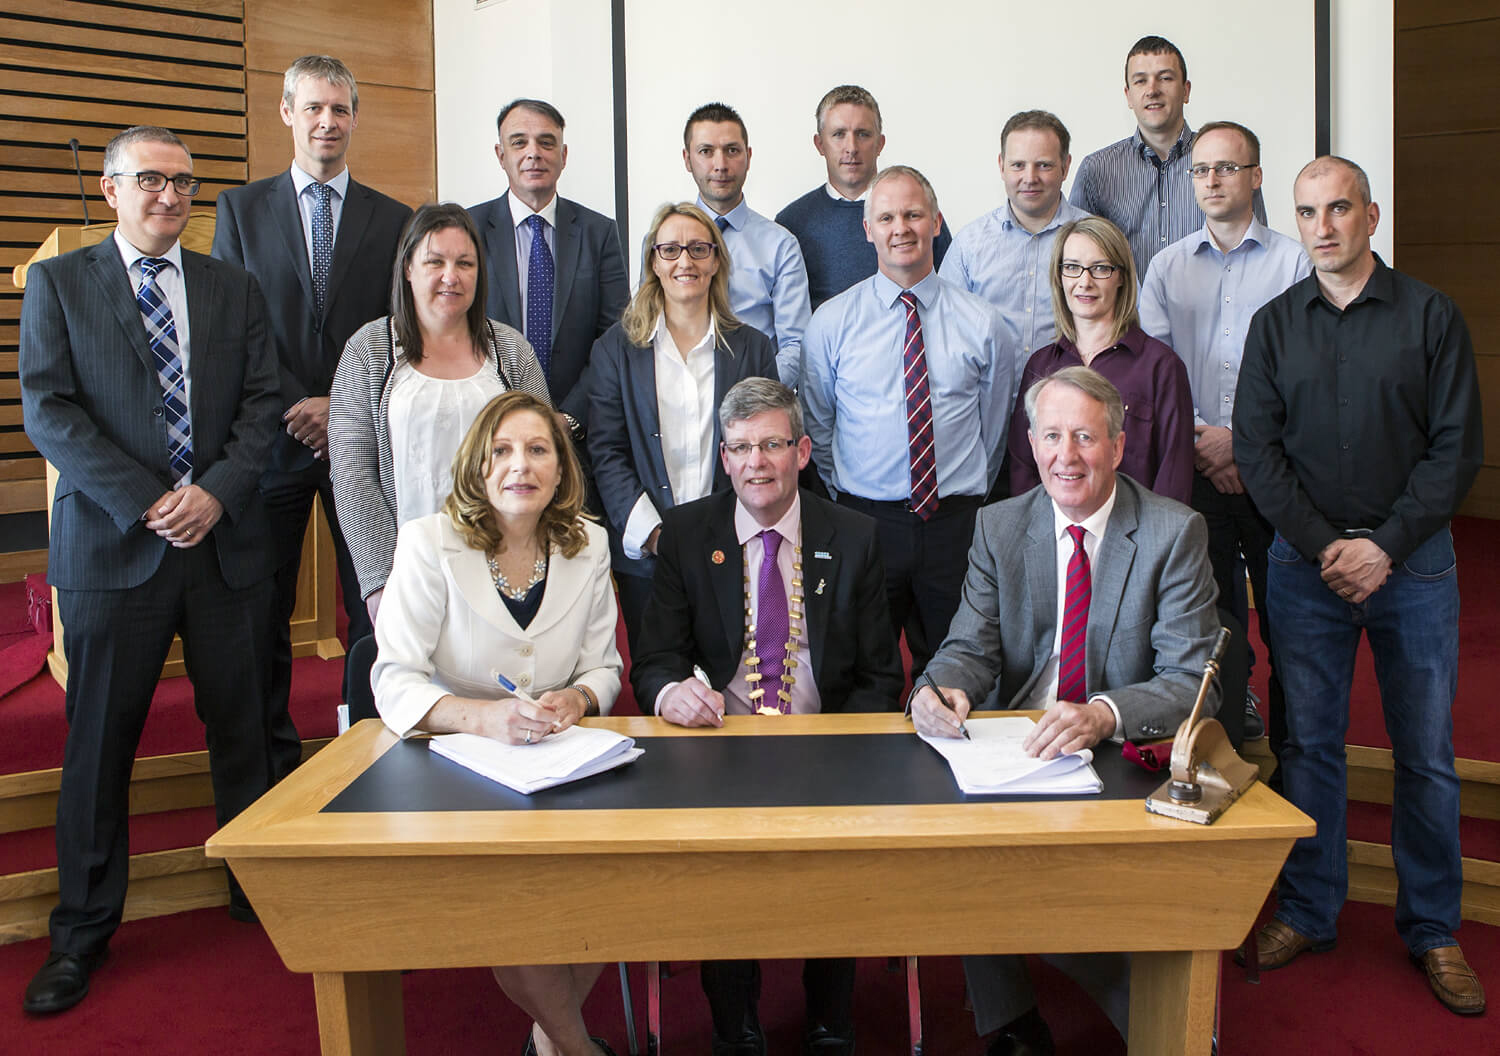 Contract signed for N4 Engineering Consultancy Services